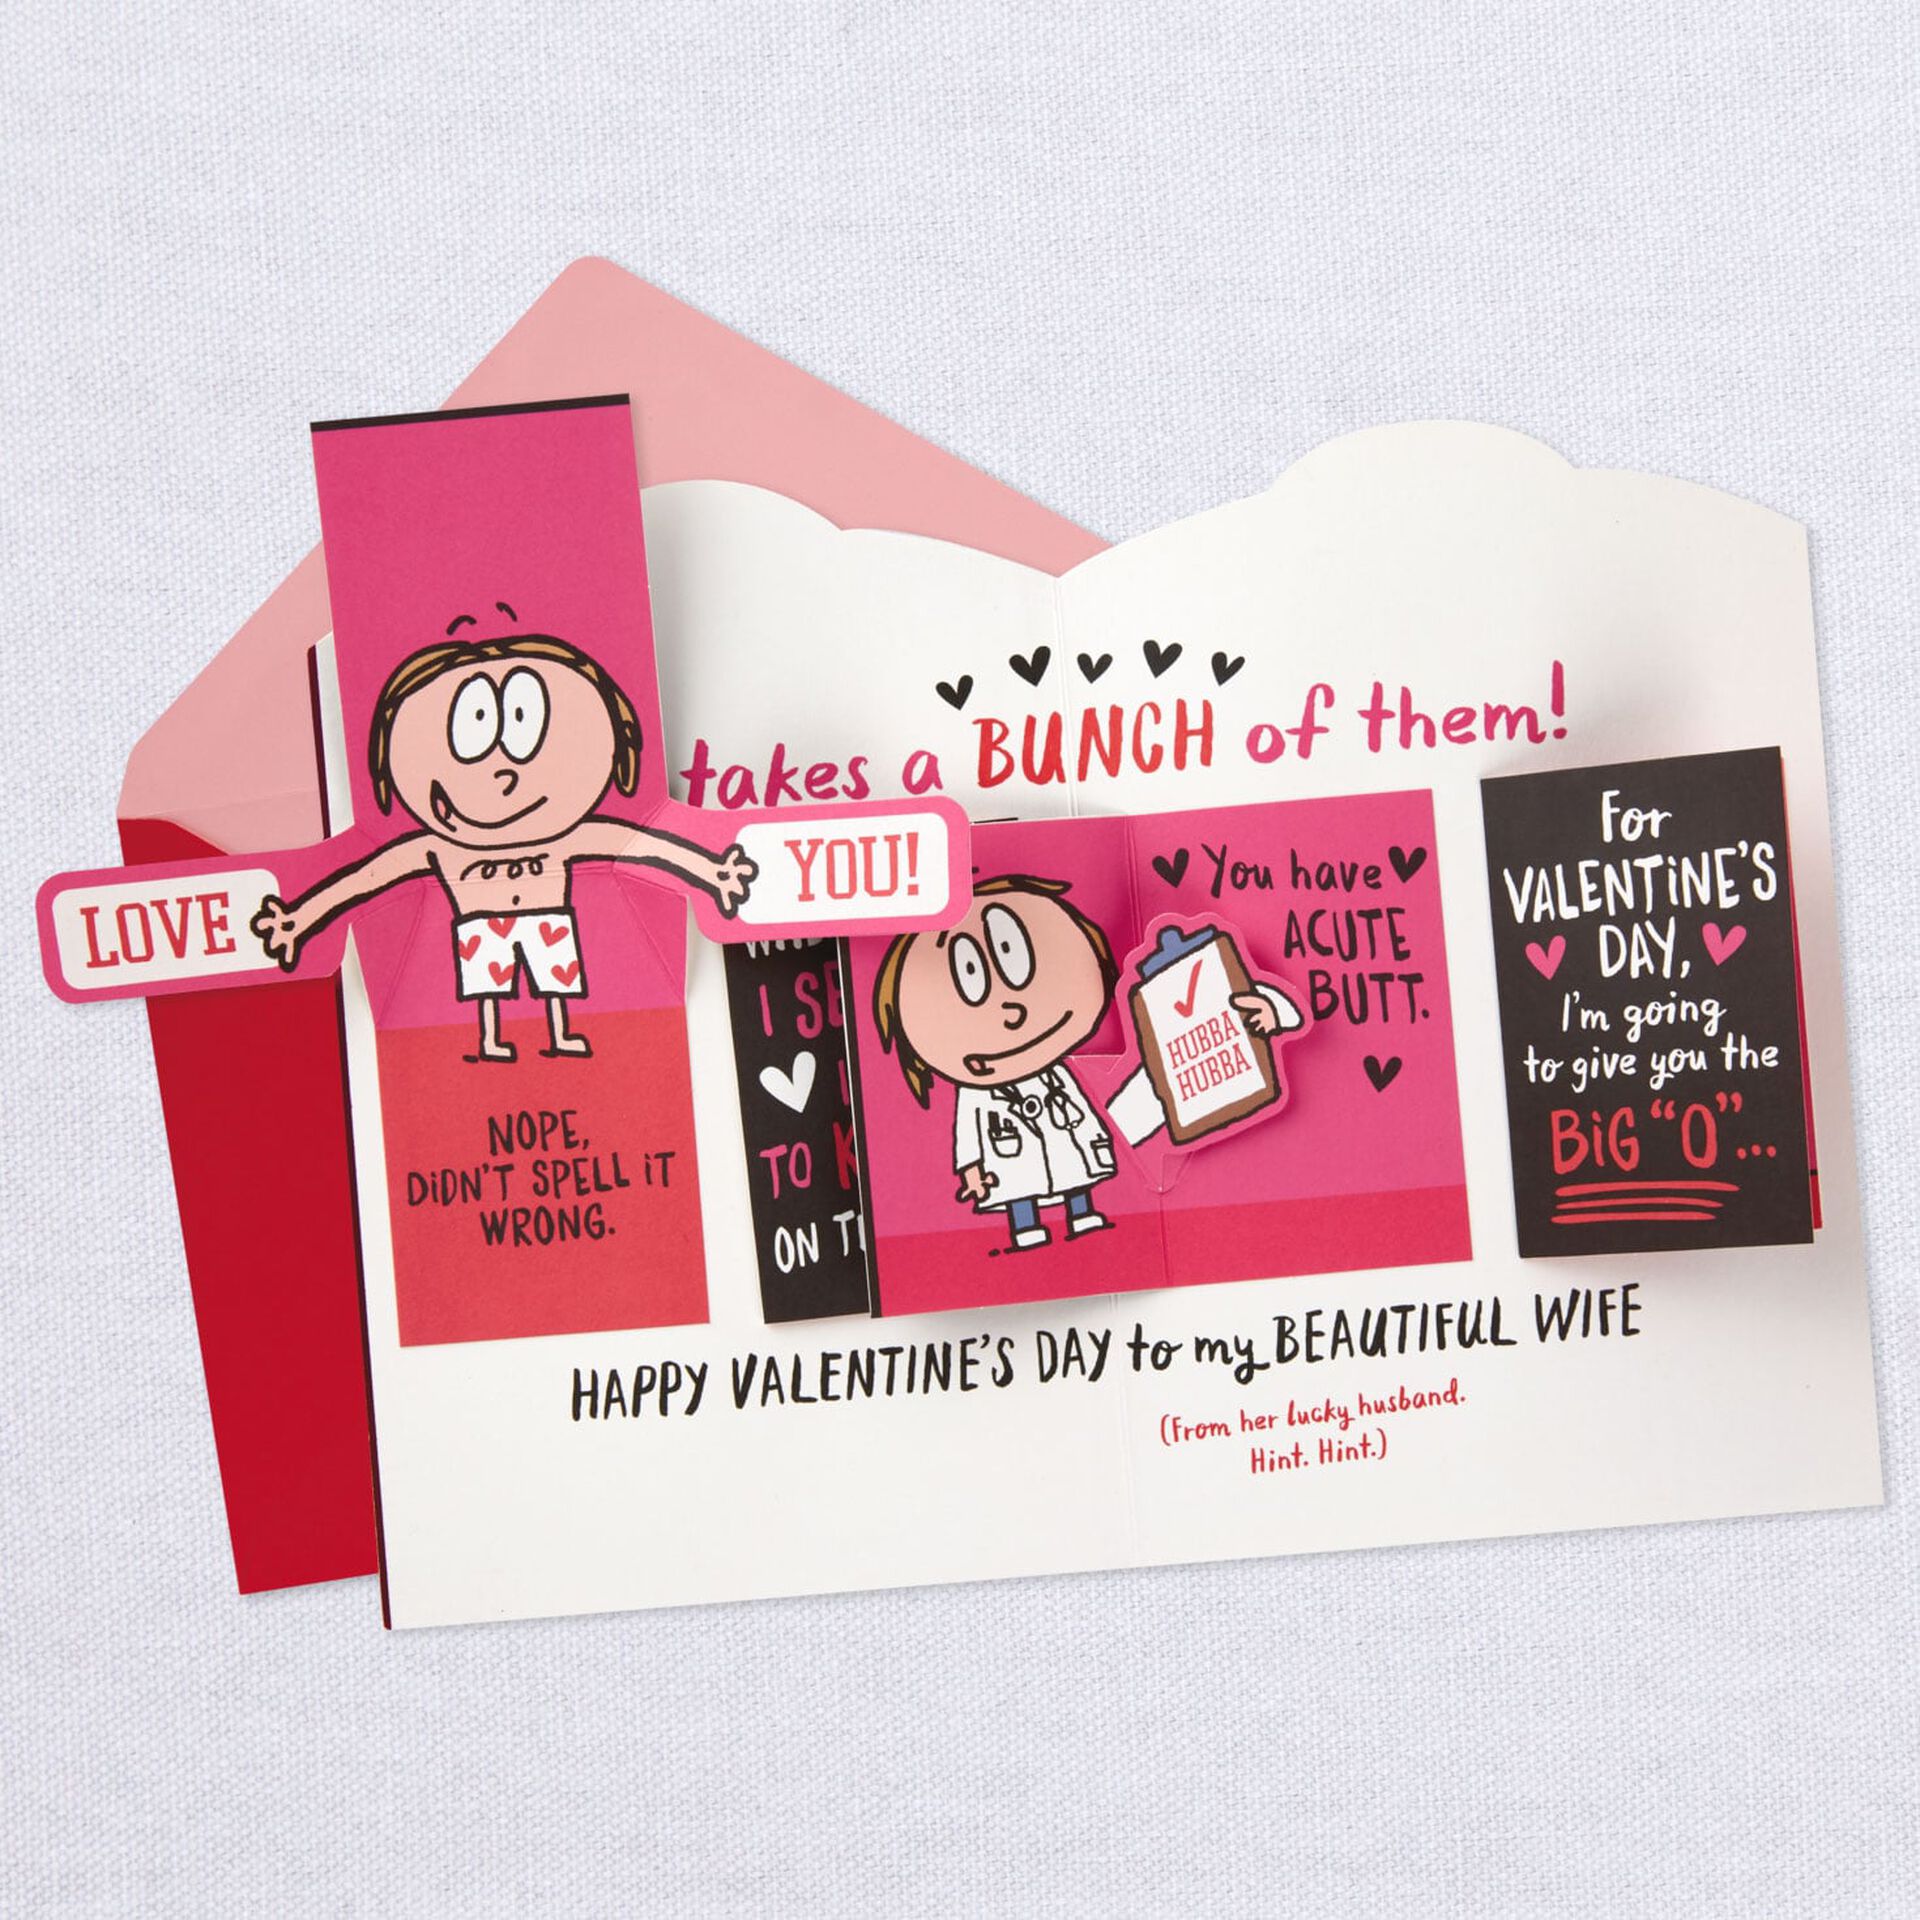 saucy funny valentines day card for wife with pop up mini cards